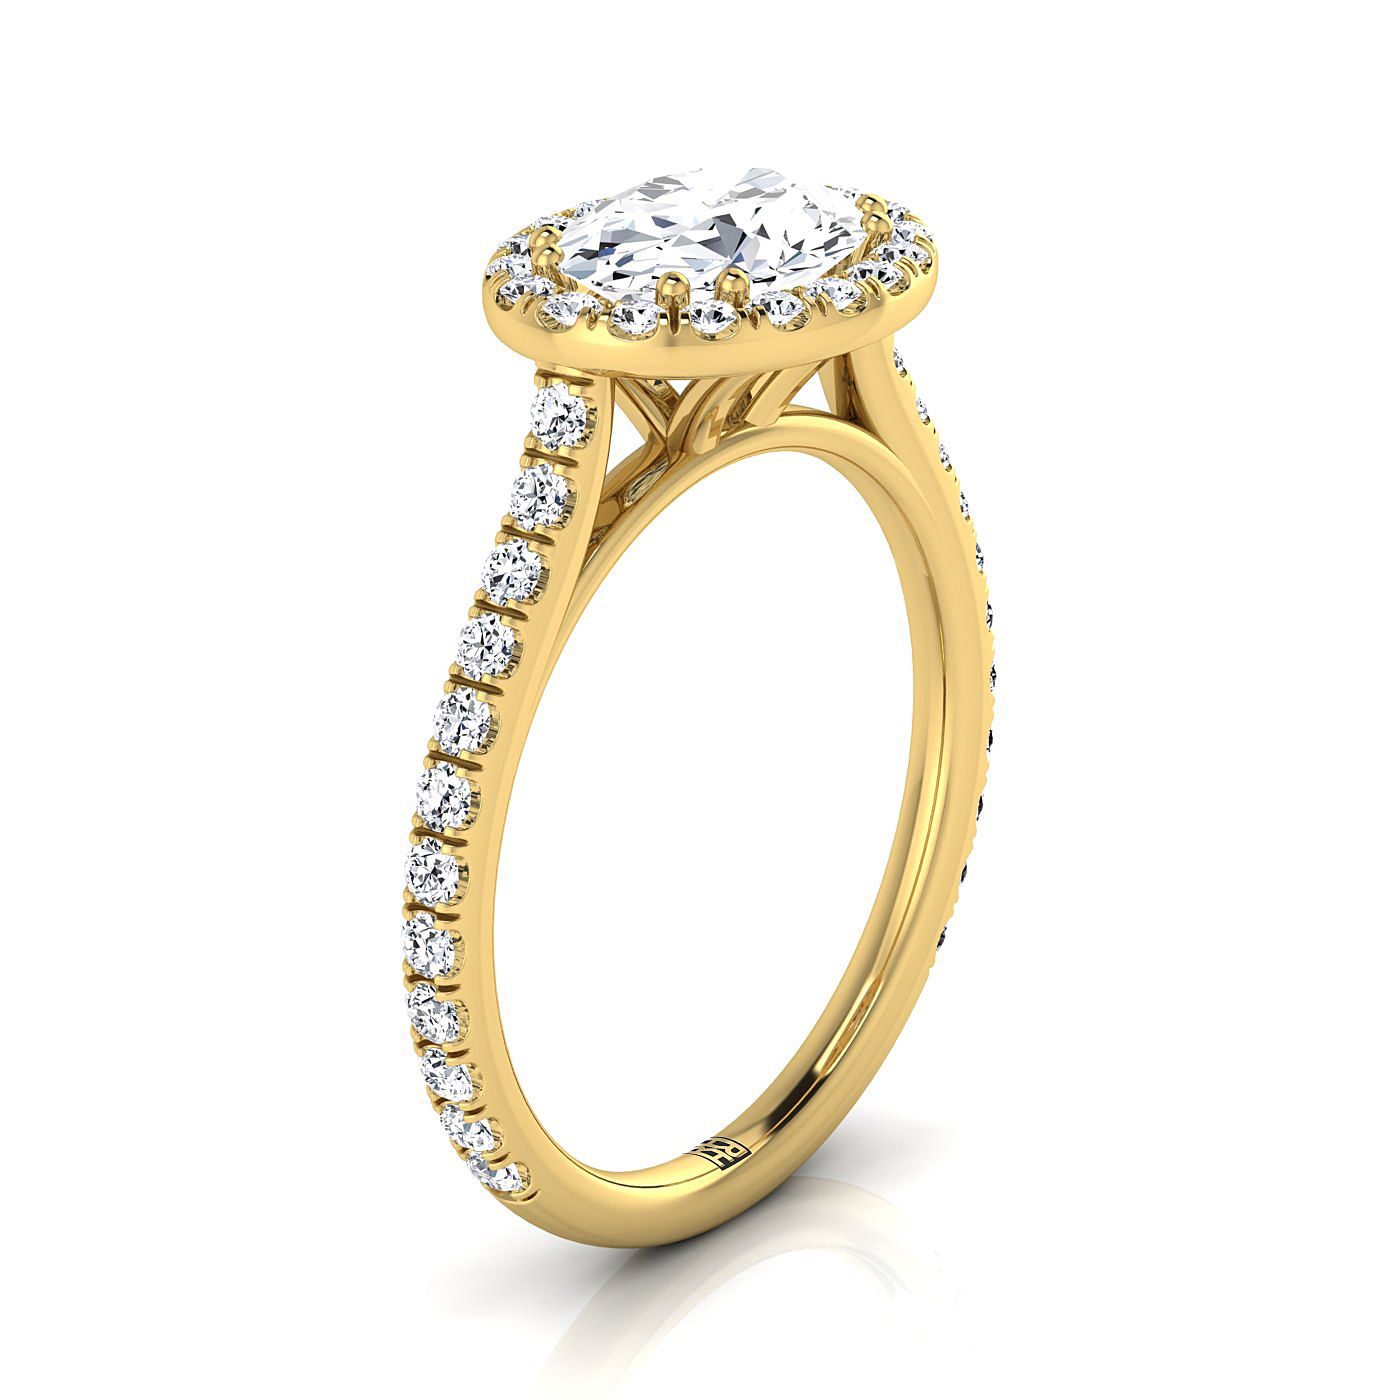 14K Yellow Gold Oval Diamond Horizontal Fancy East West Halo Engagement Ring -1/2ctw